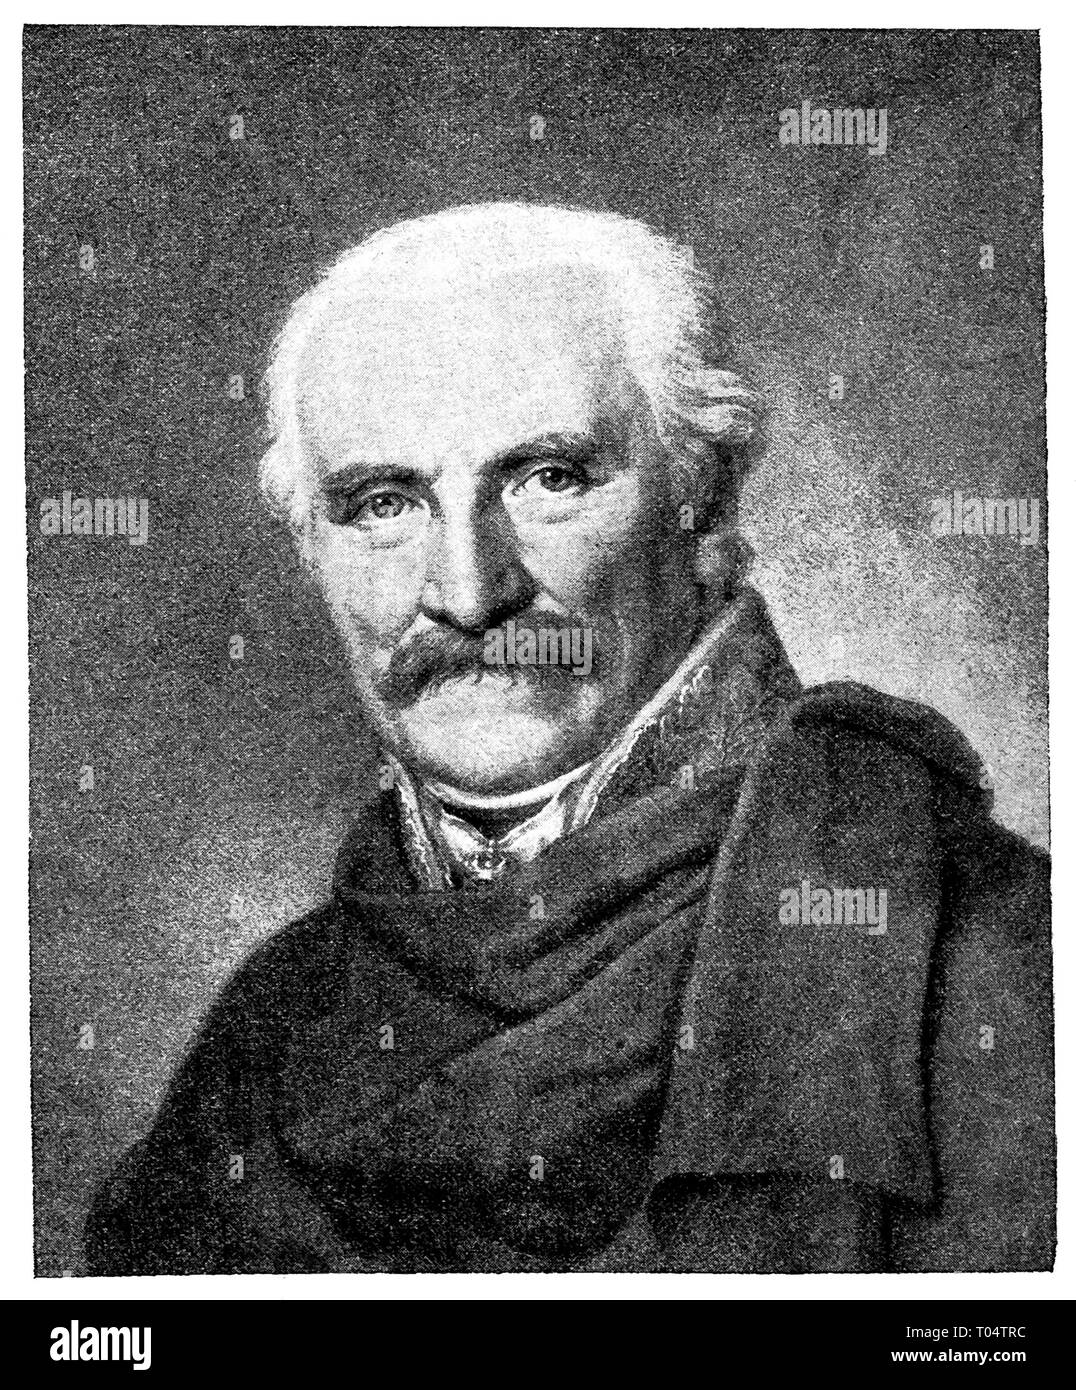 Blücher. Portrait work G.Gregera. Digital improved reproduction from Illustrated overview of the life of mankind in the 19th century, 1901 edition, Marx publishing house, St. Petersburg. Stock Photo